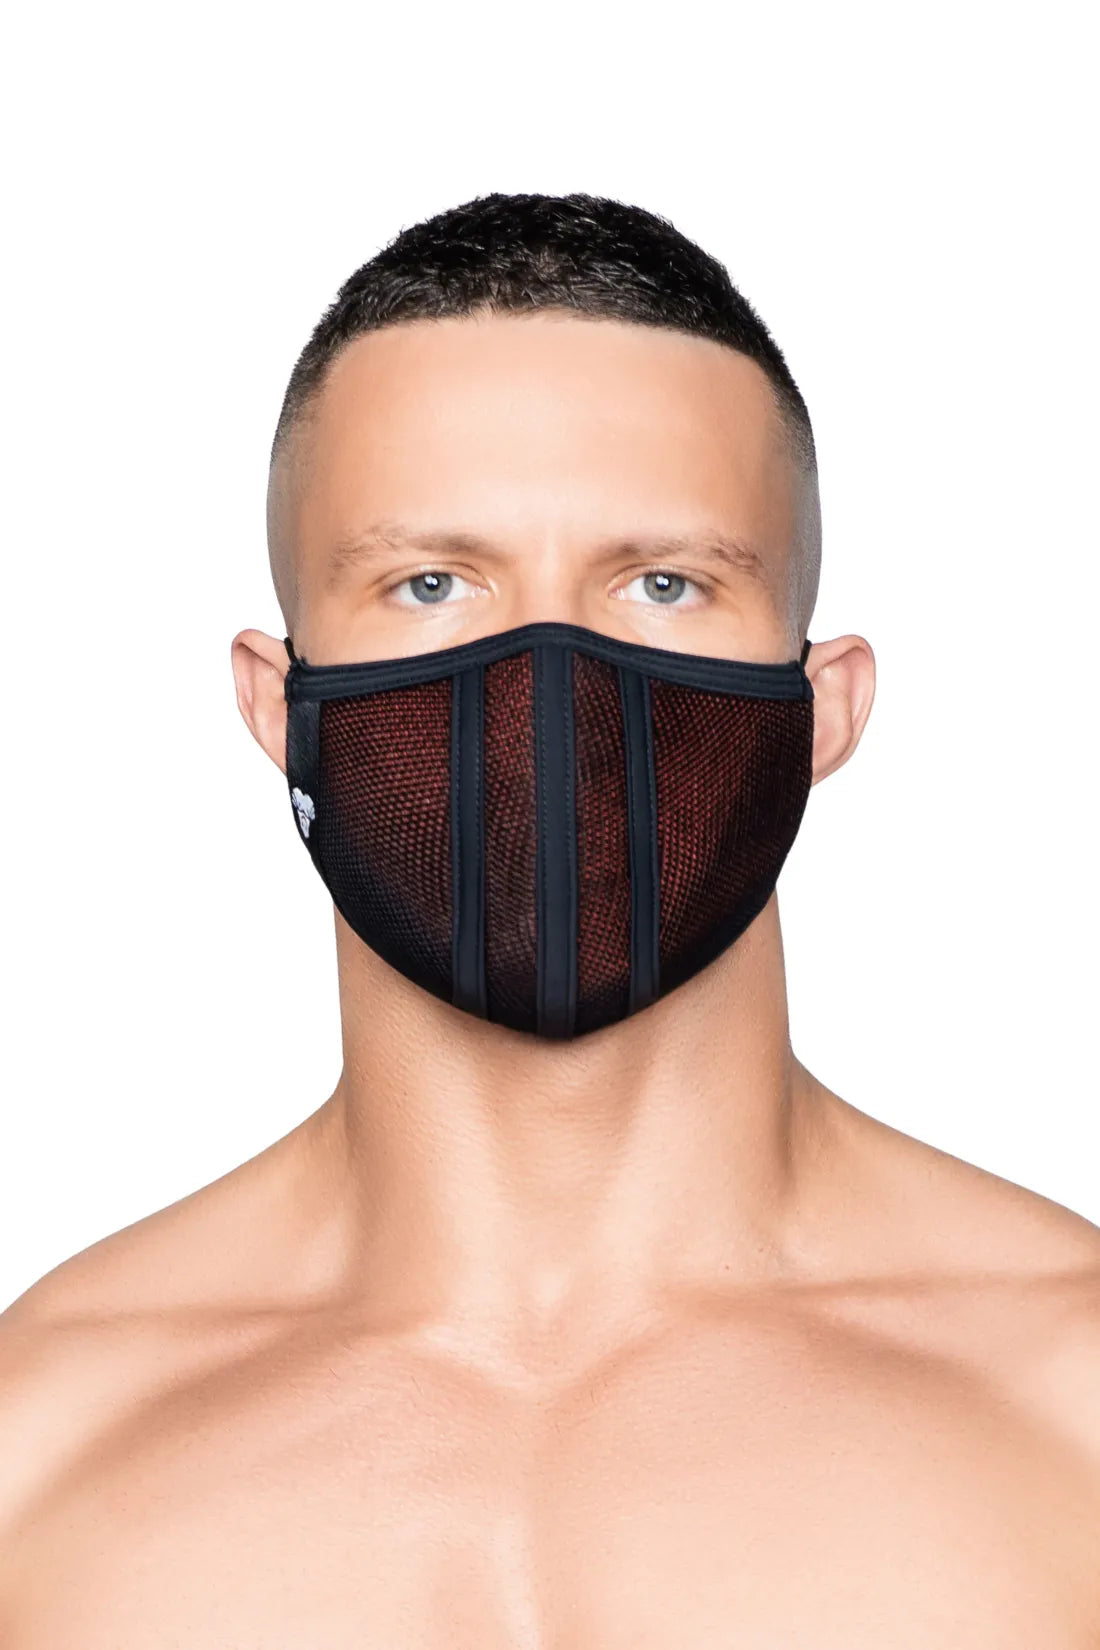 Life 3D Mask. Red and Black